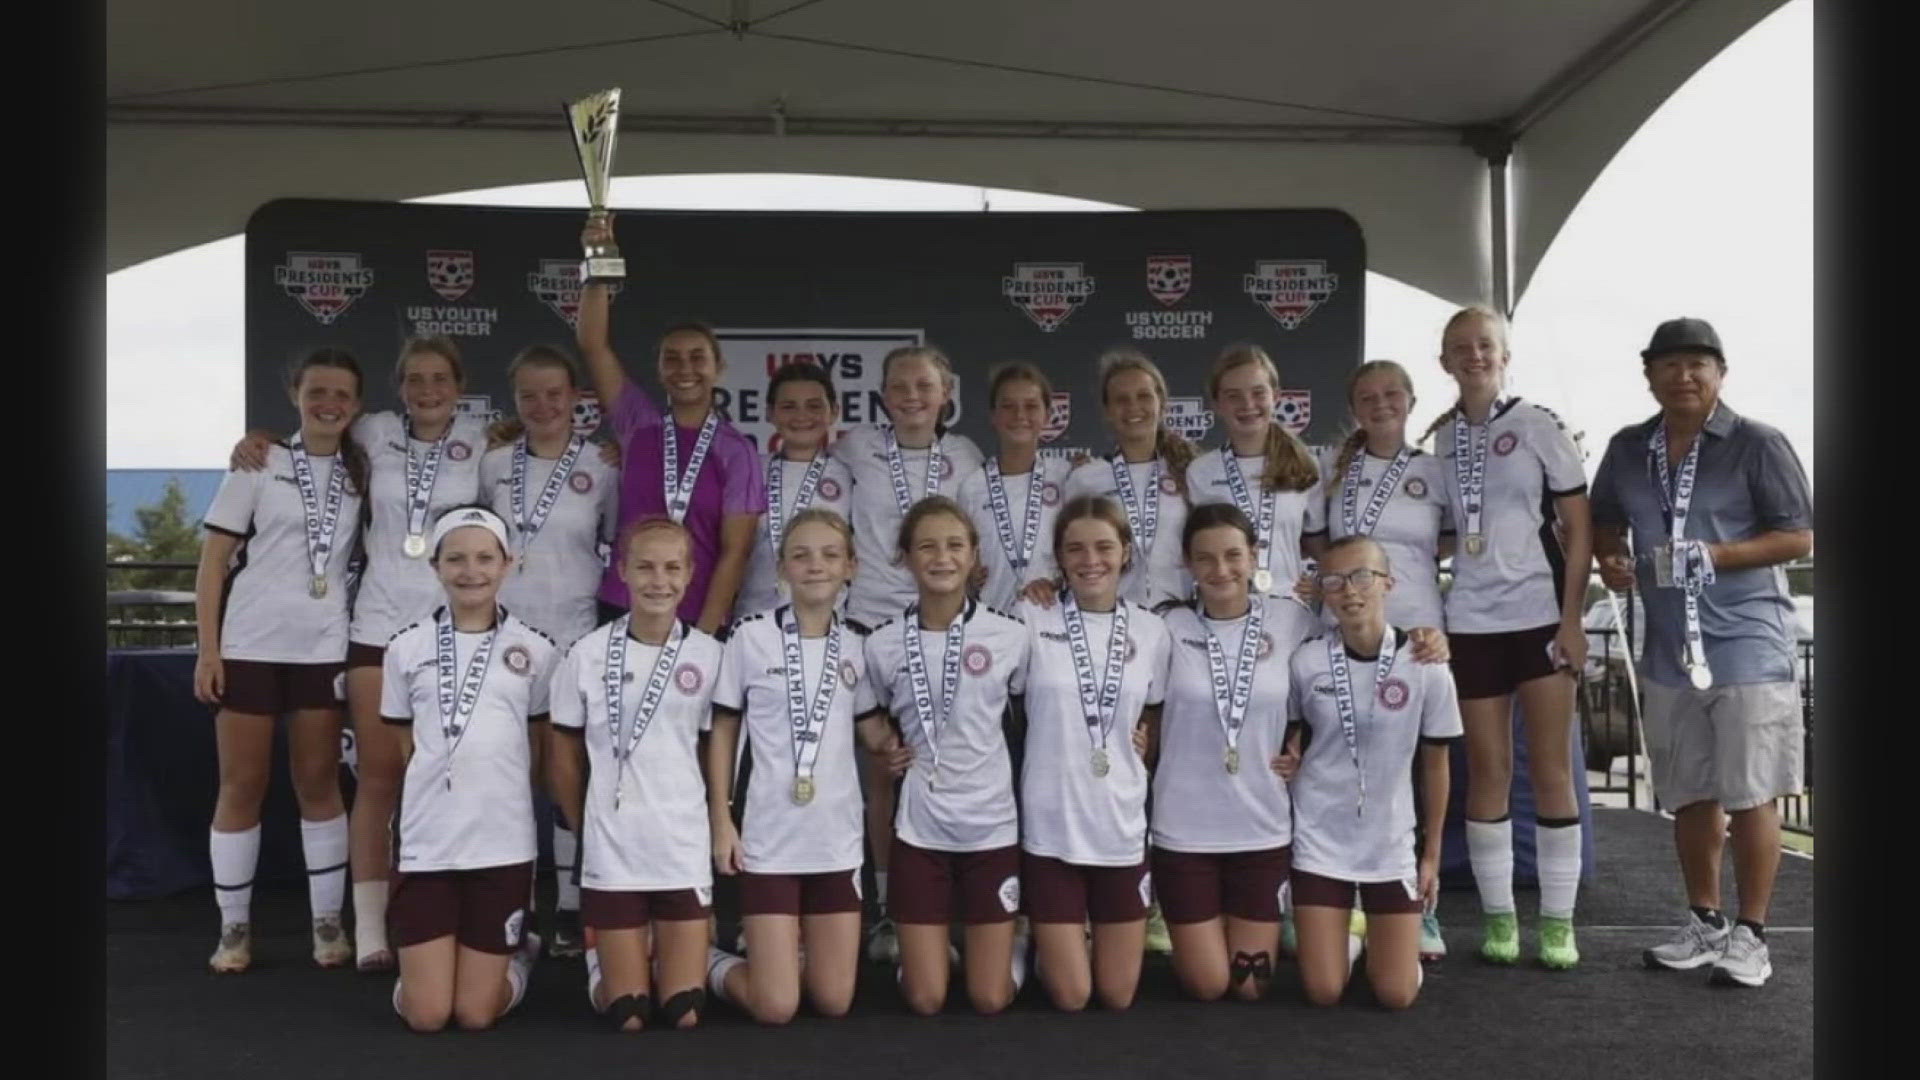 The U13 Lady Mustangs won the club's first-ever regional cup last week. Now, they have a shot at competing at the highest level of competition in their age category.